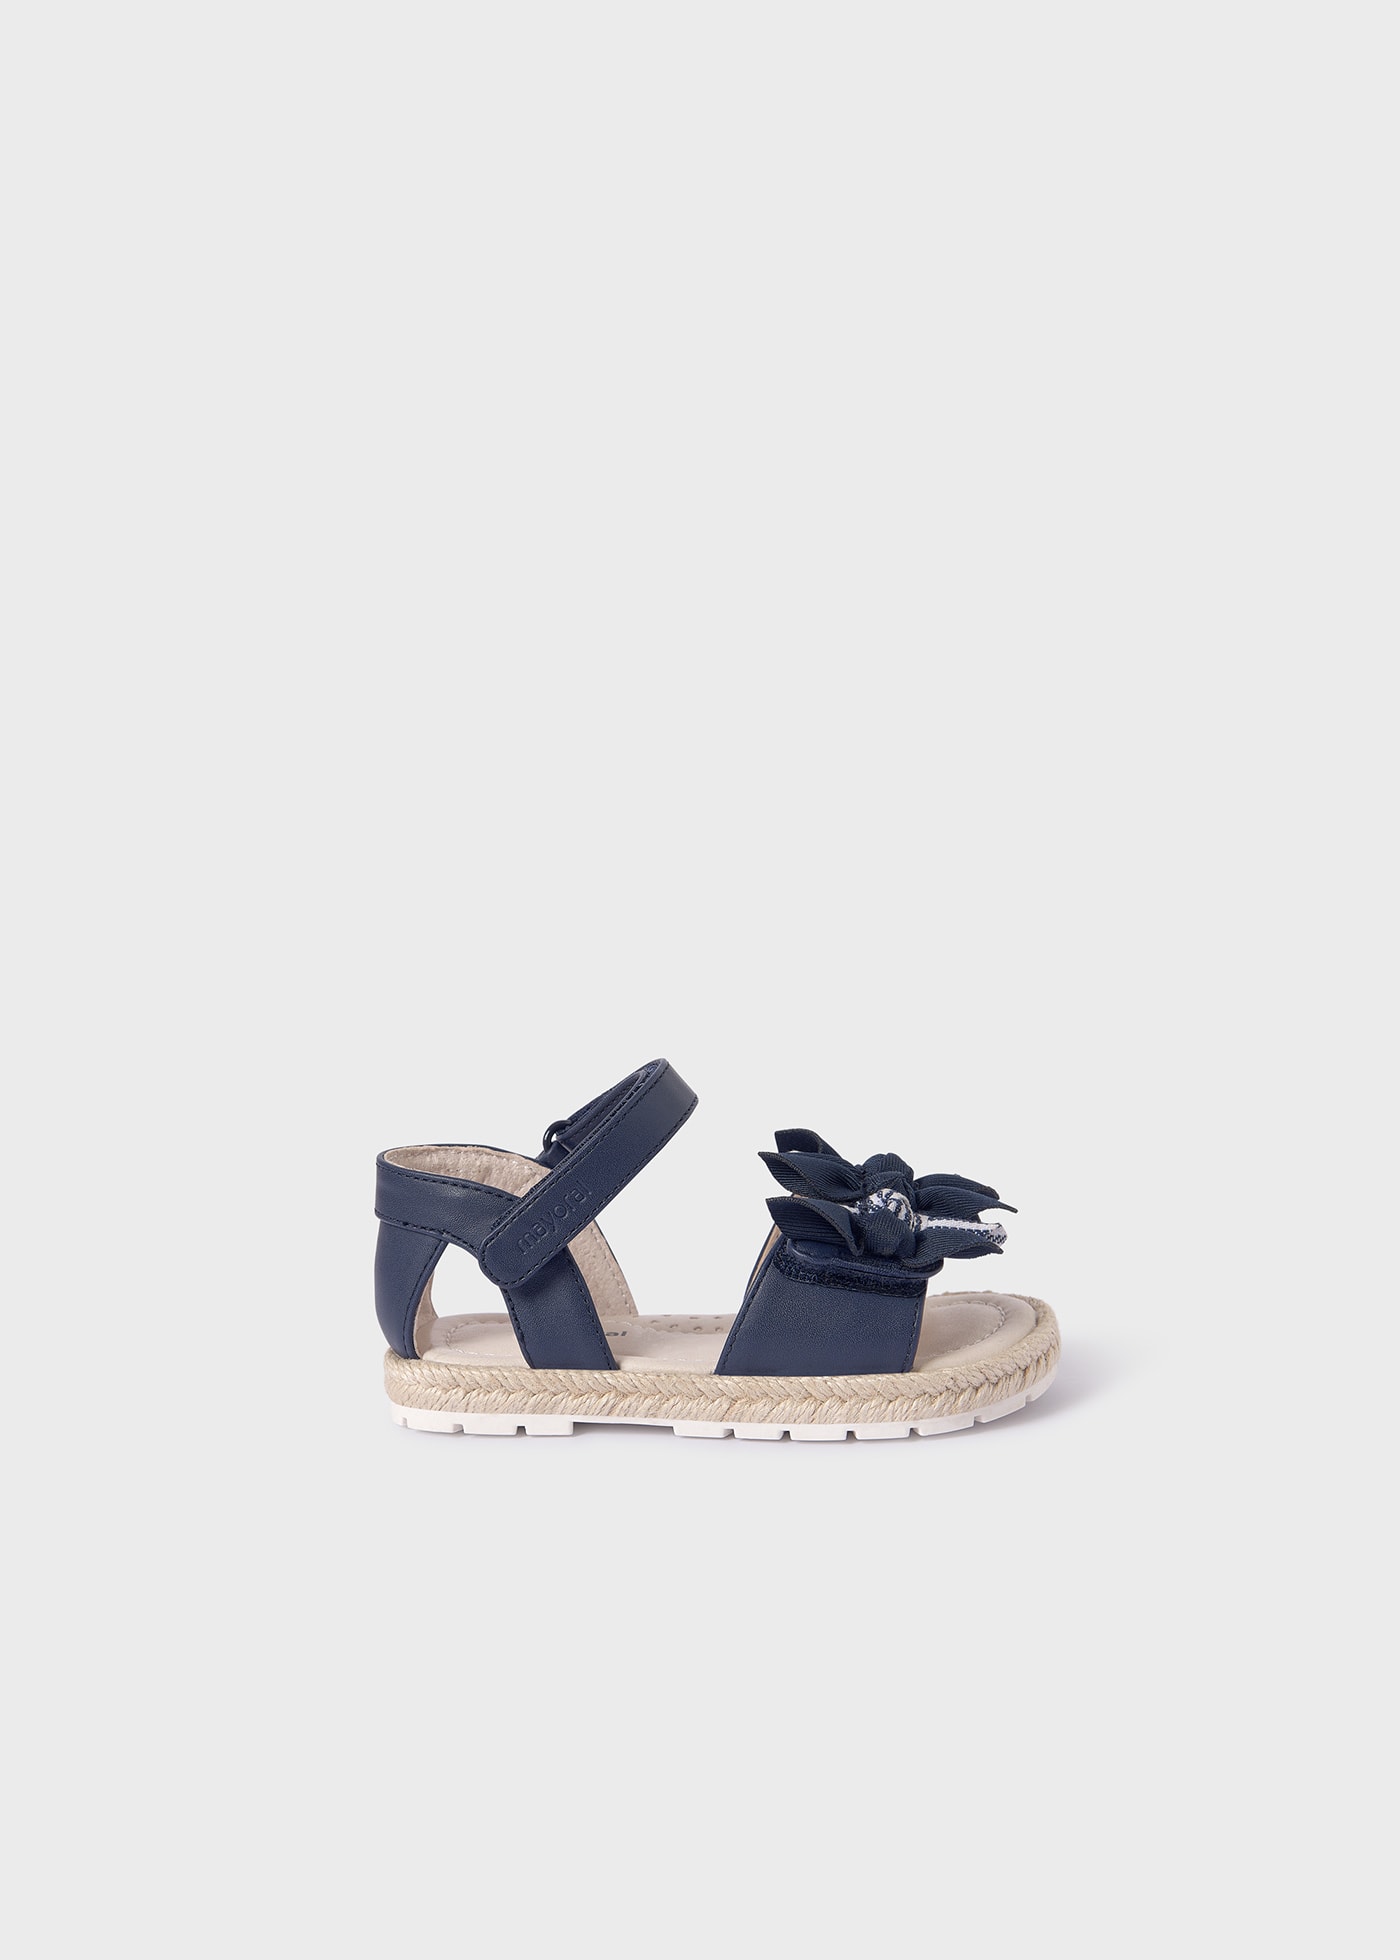 Baby Jute Sandals Sustainable Leather